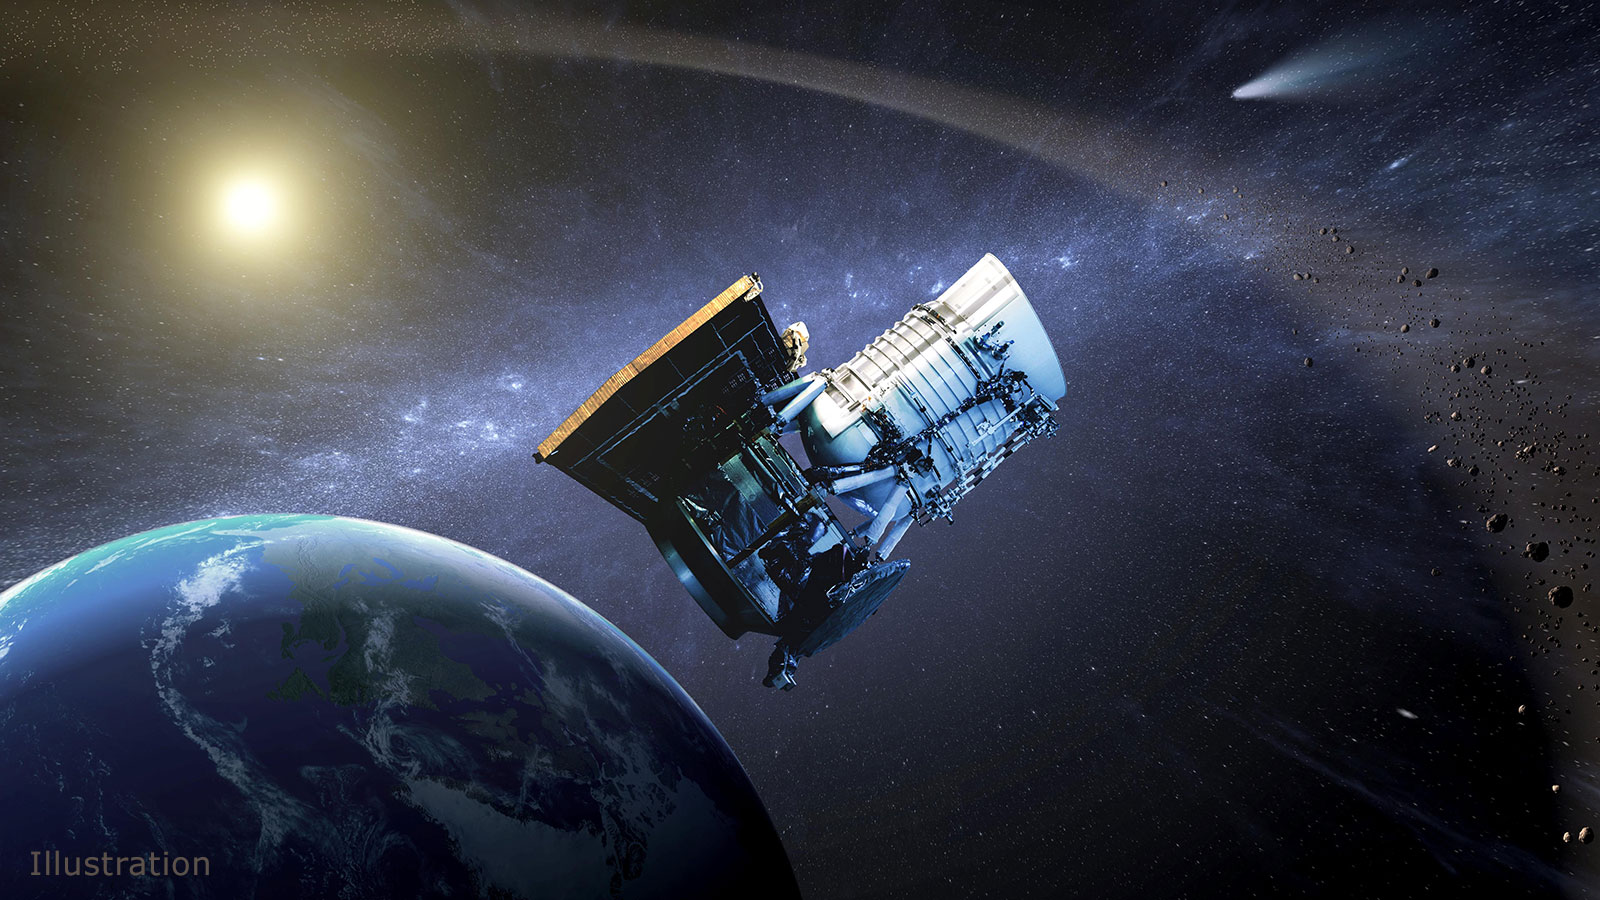 Artist's concept depicts the NEOWISE spacecraft